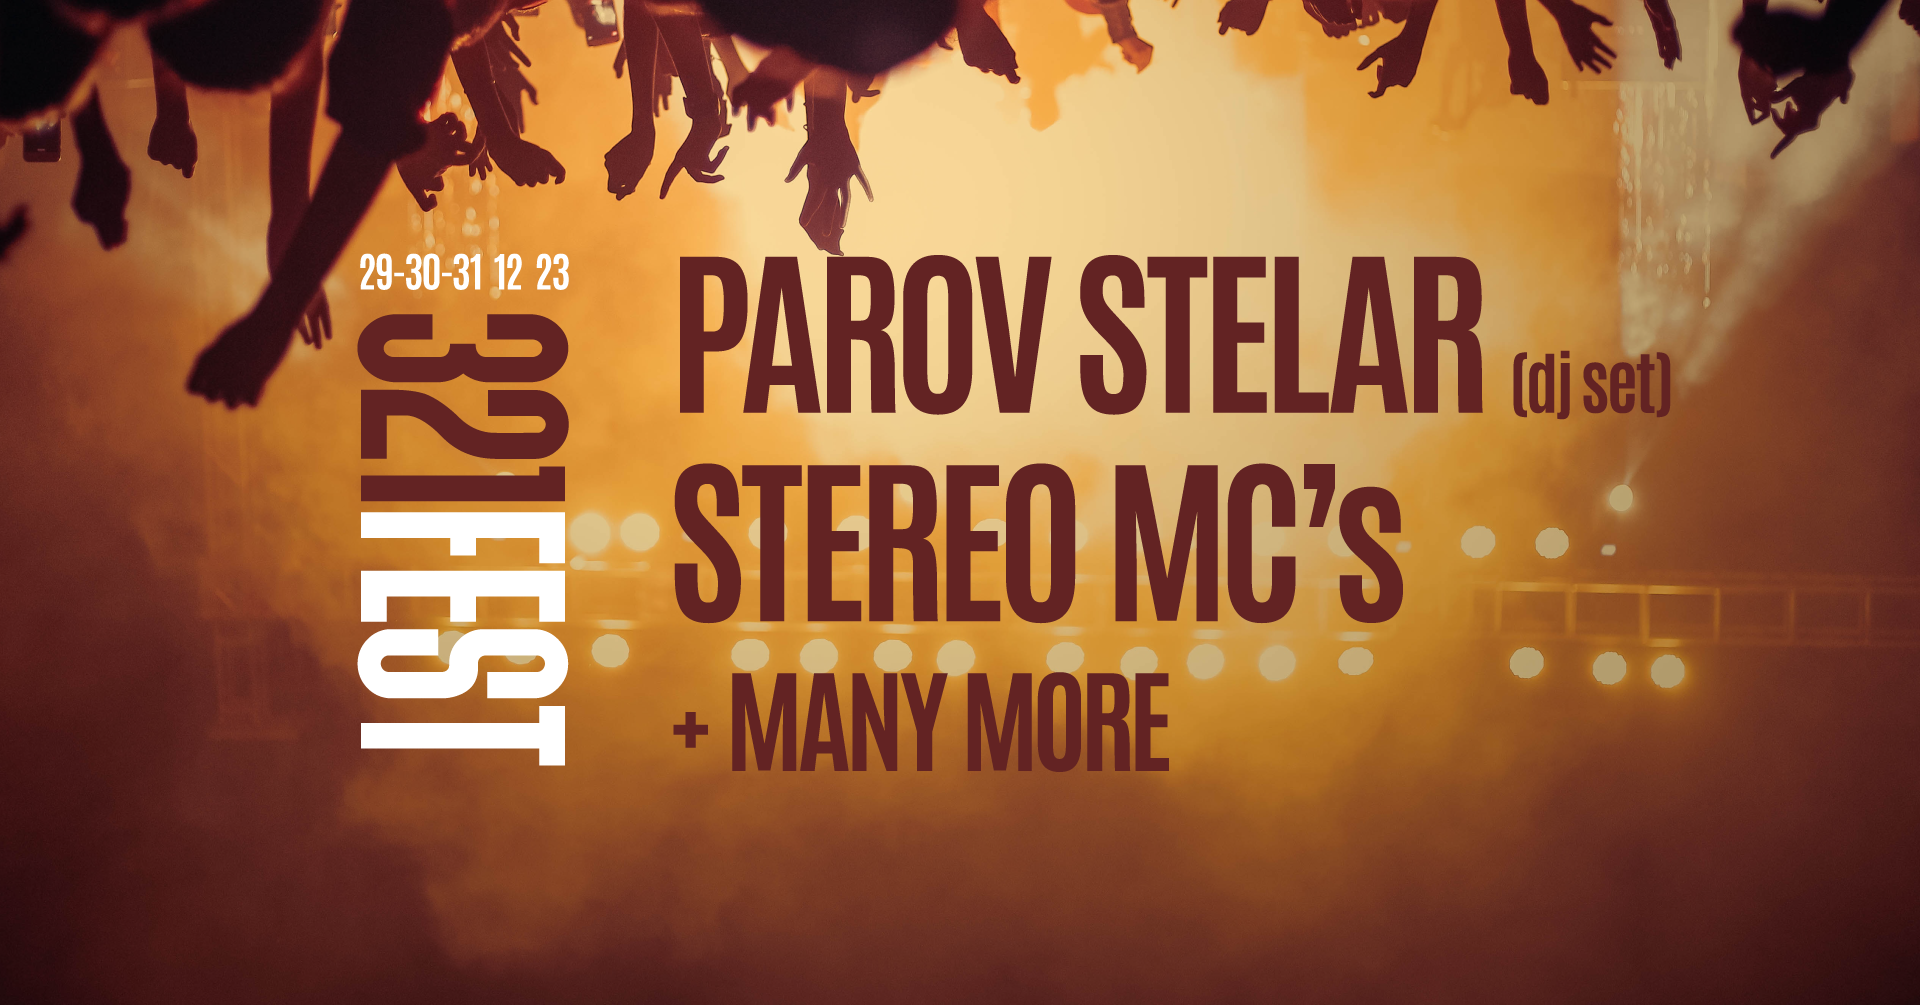 321FEST: Parov Stelar and Stereo MC's on the New Year's Weekend in Šibenik!